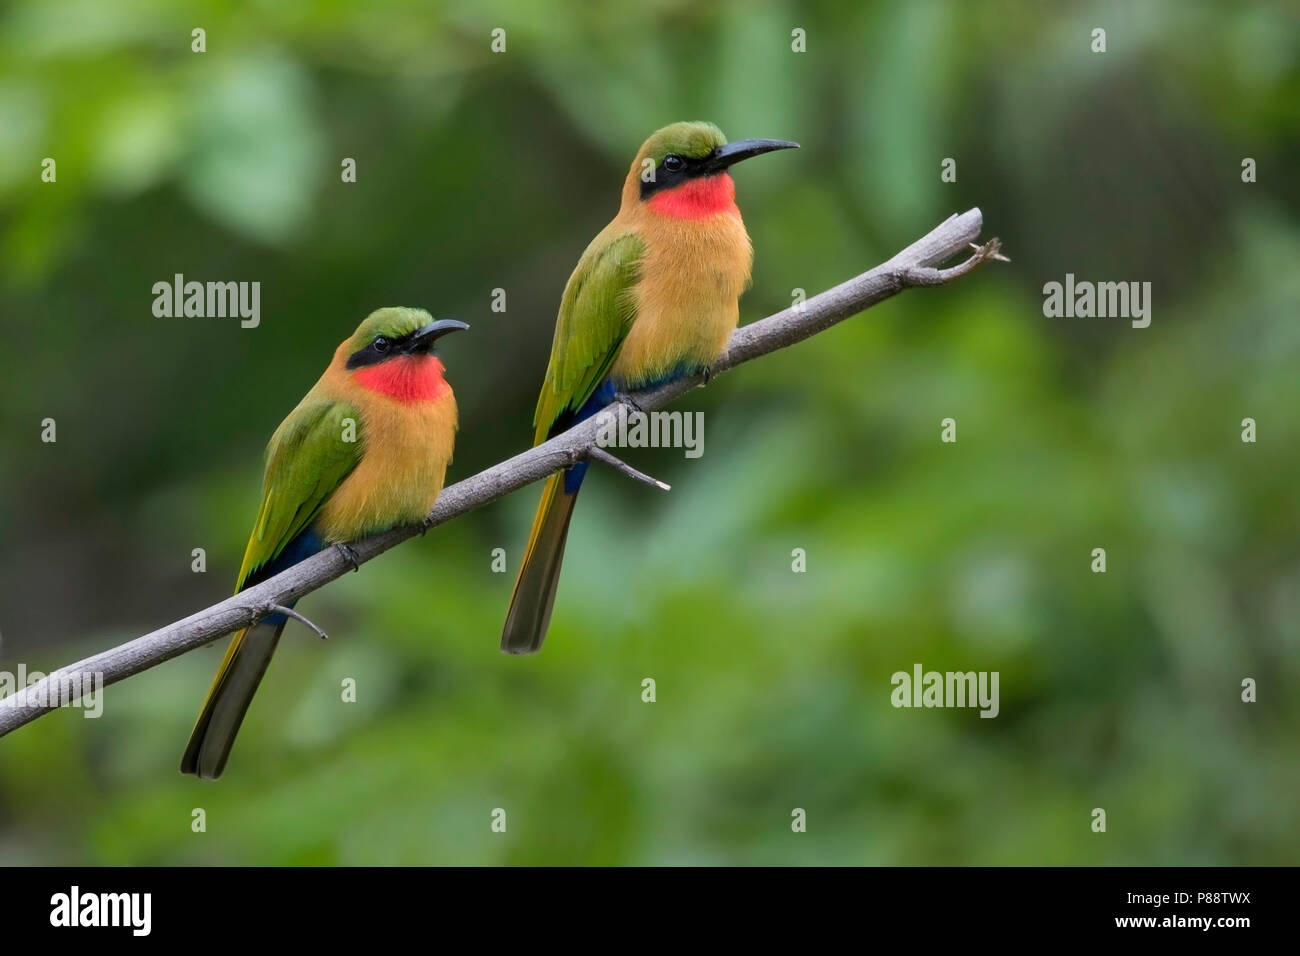 Red-throated Bee-eater (Merops bulocki) perched Stock Photo